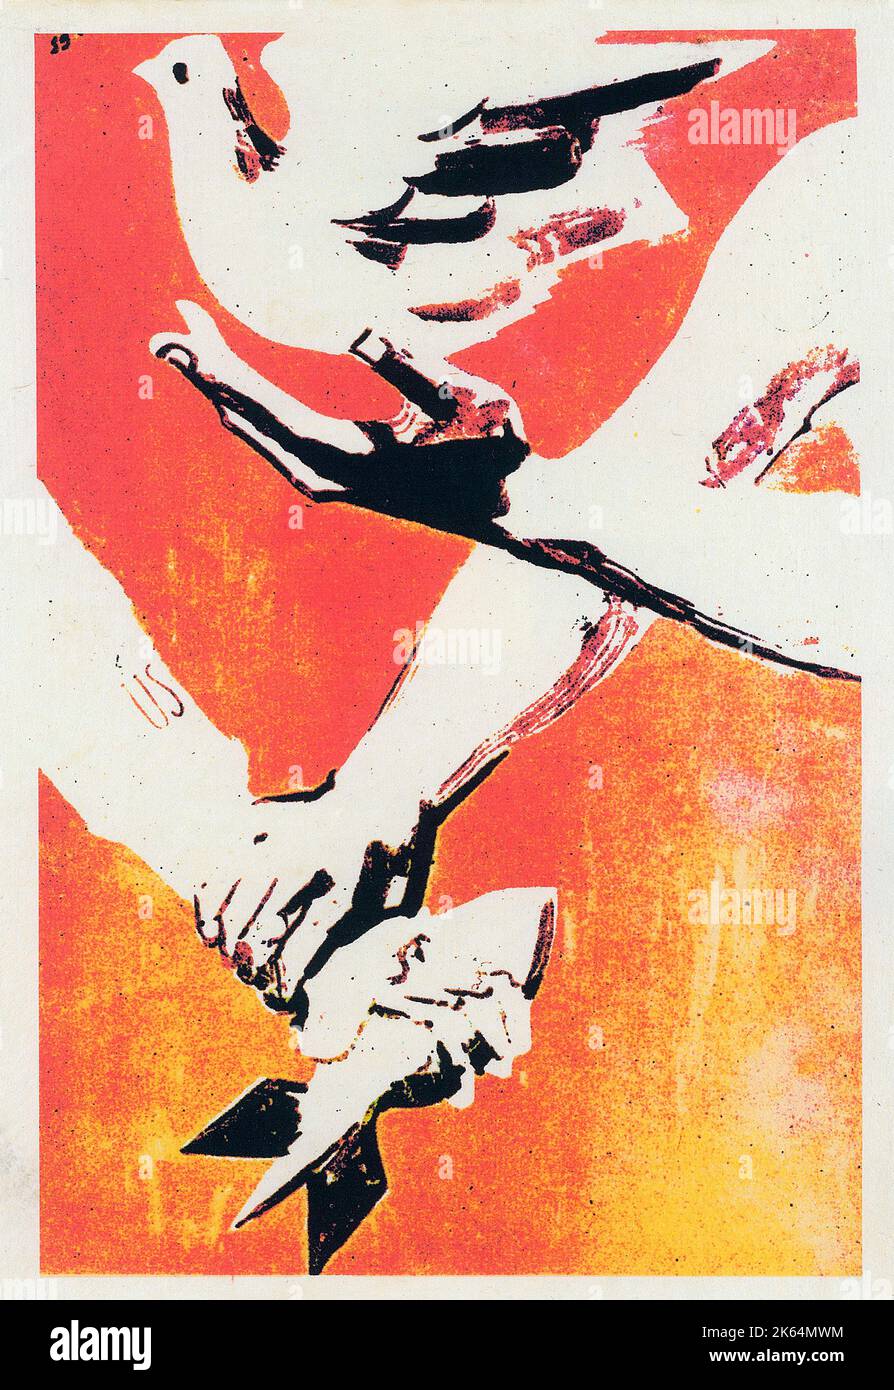 Vietnam War - Vietnamese Patriotic Poster - "Peace not War". The hand holding the bomb is restrained, whilst the dove is released. Stock Photo